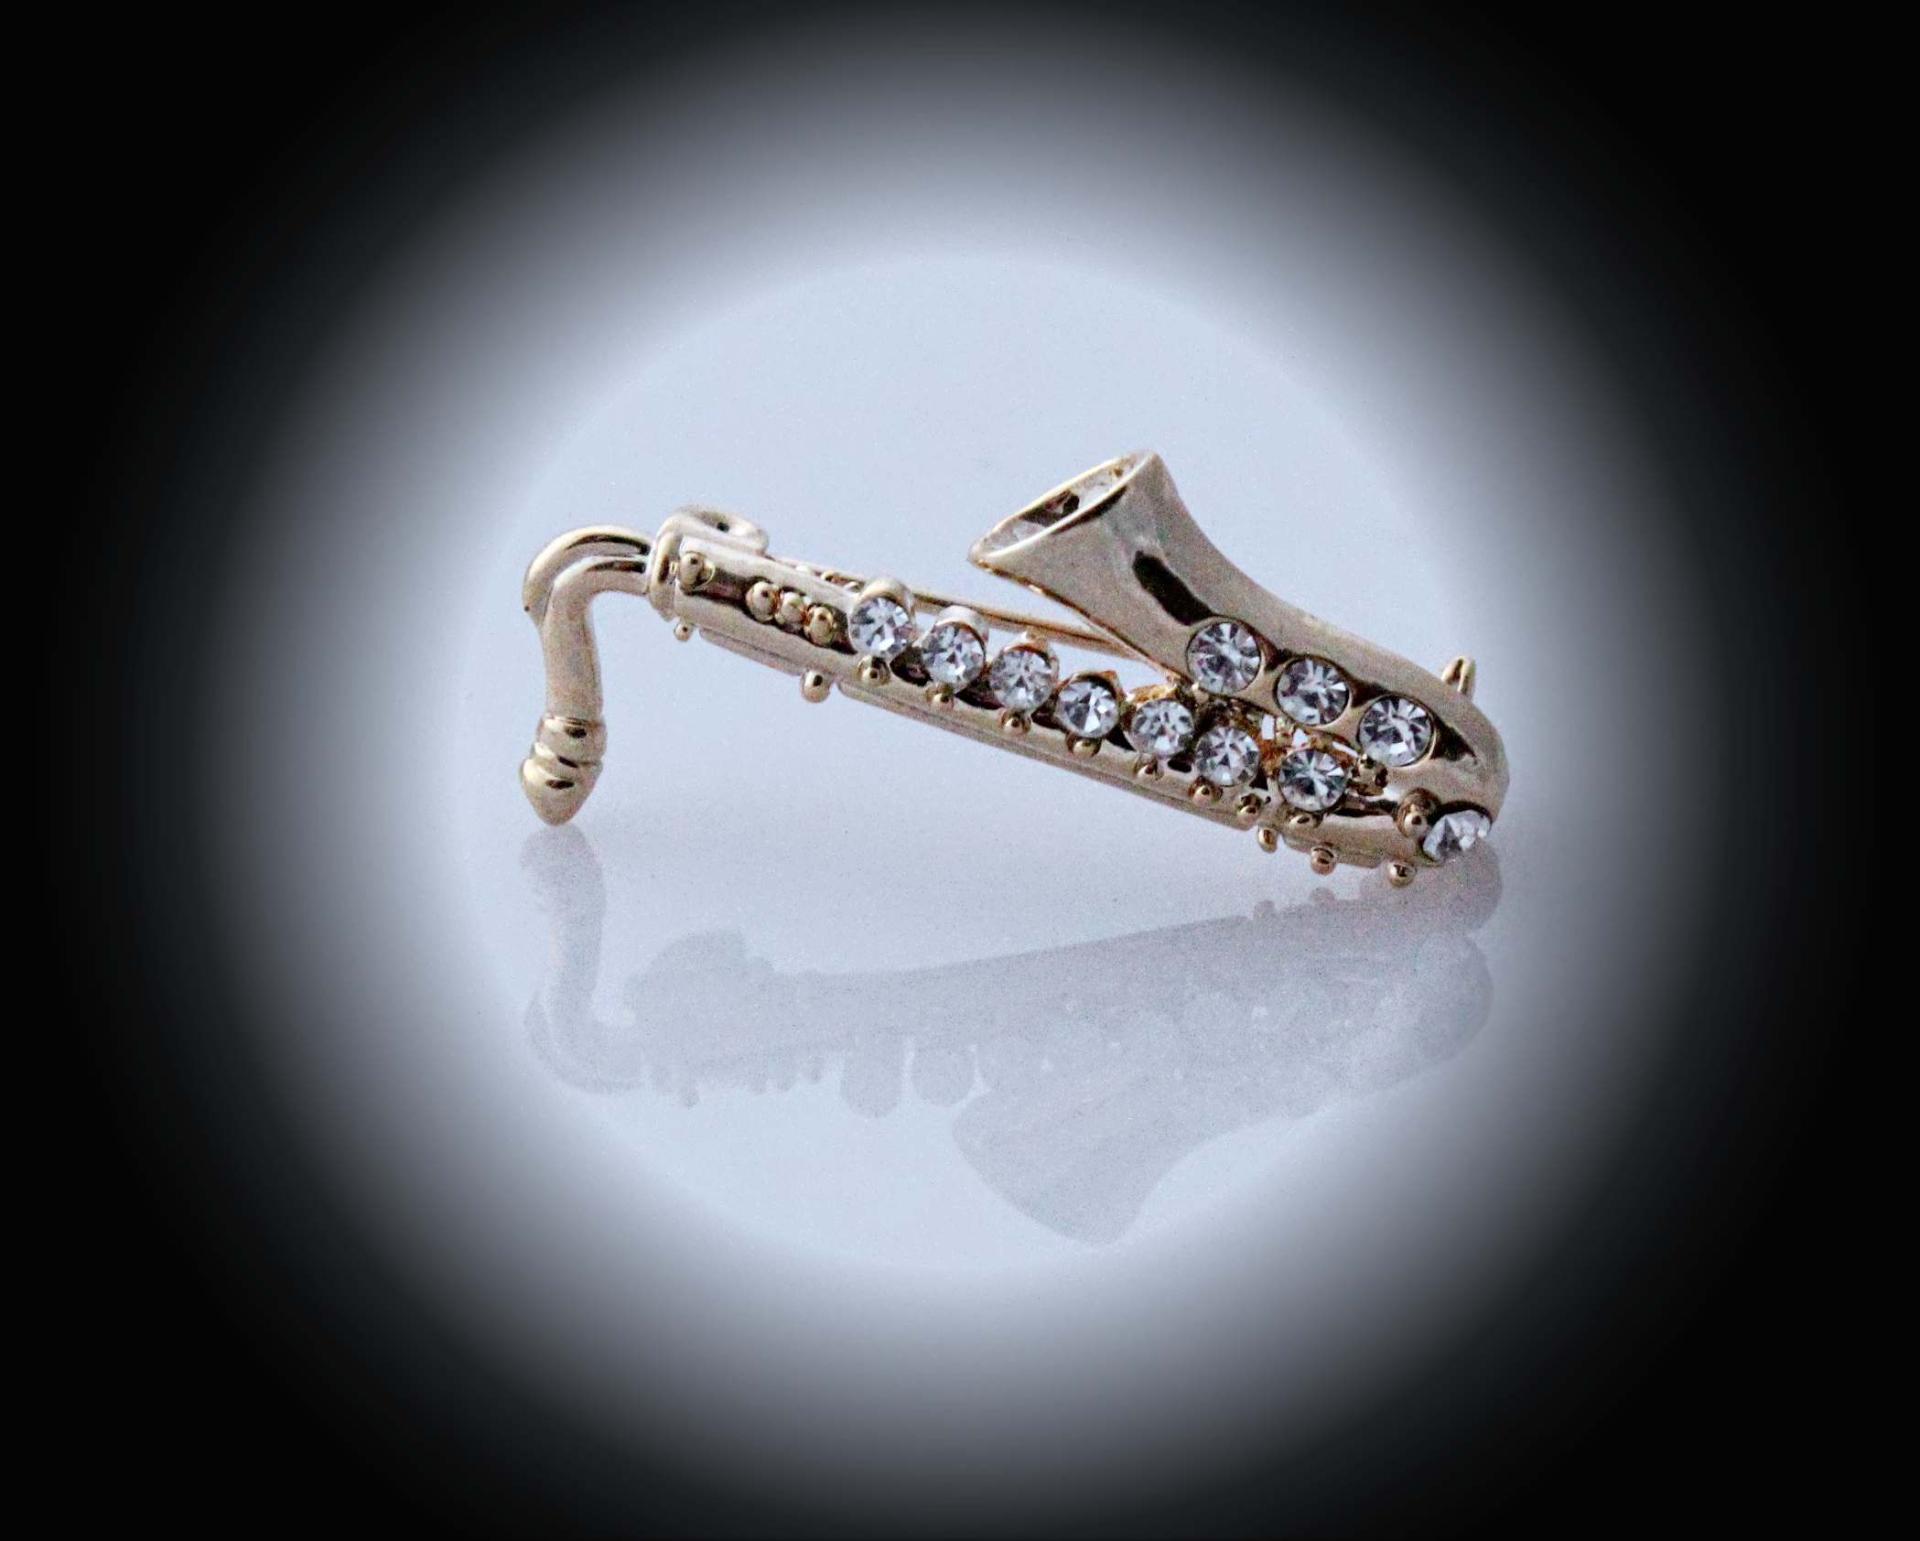 Saxophone Brooch - Gold with Crystal Stones